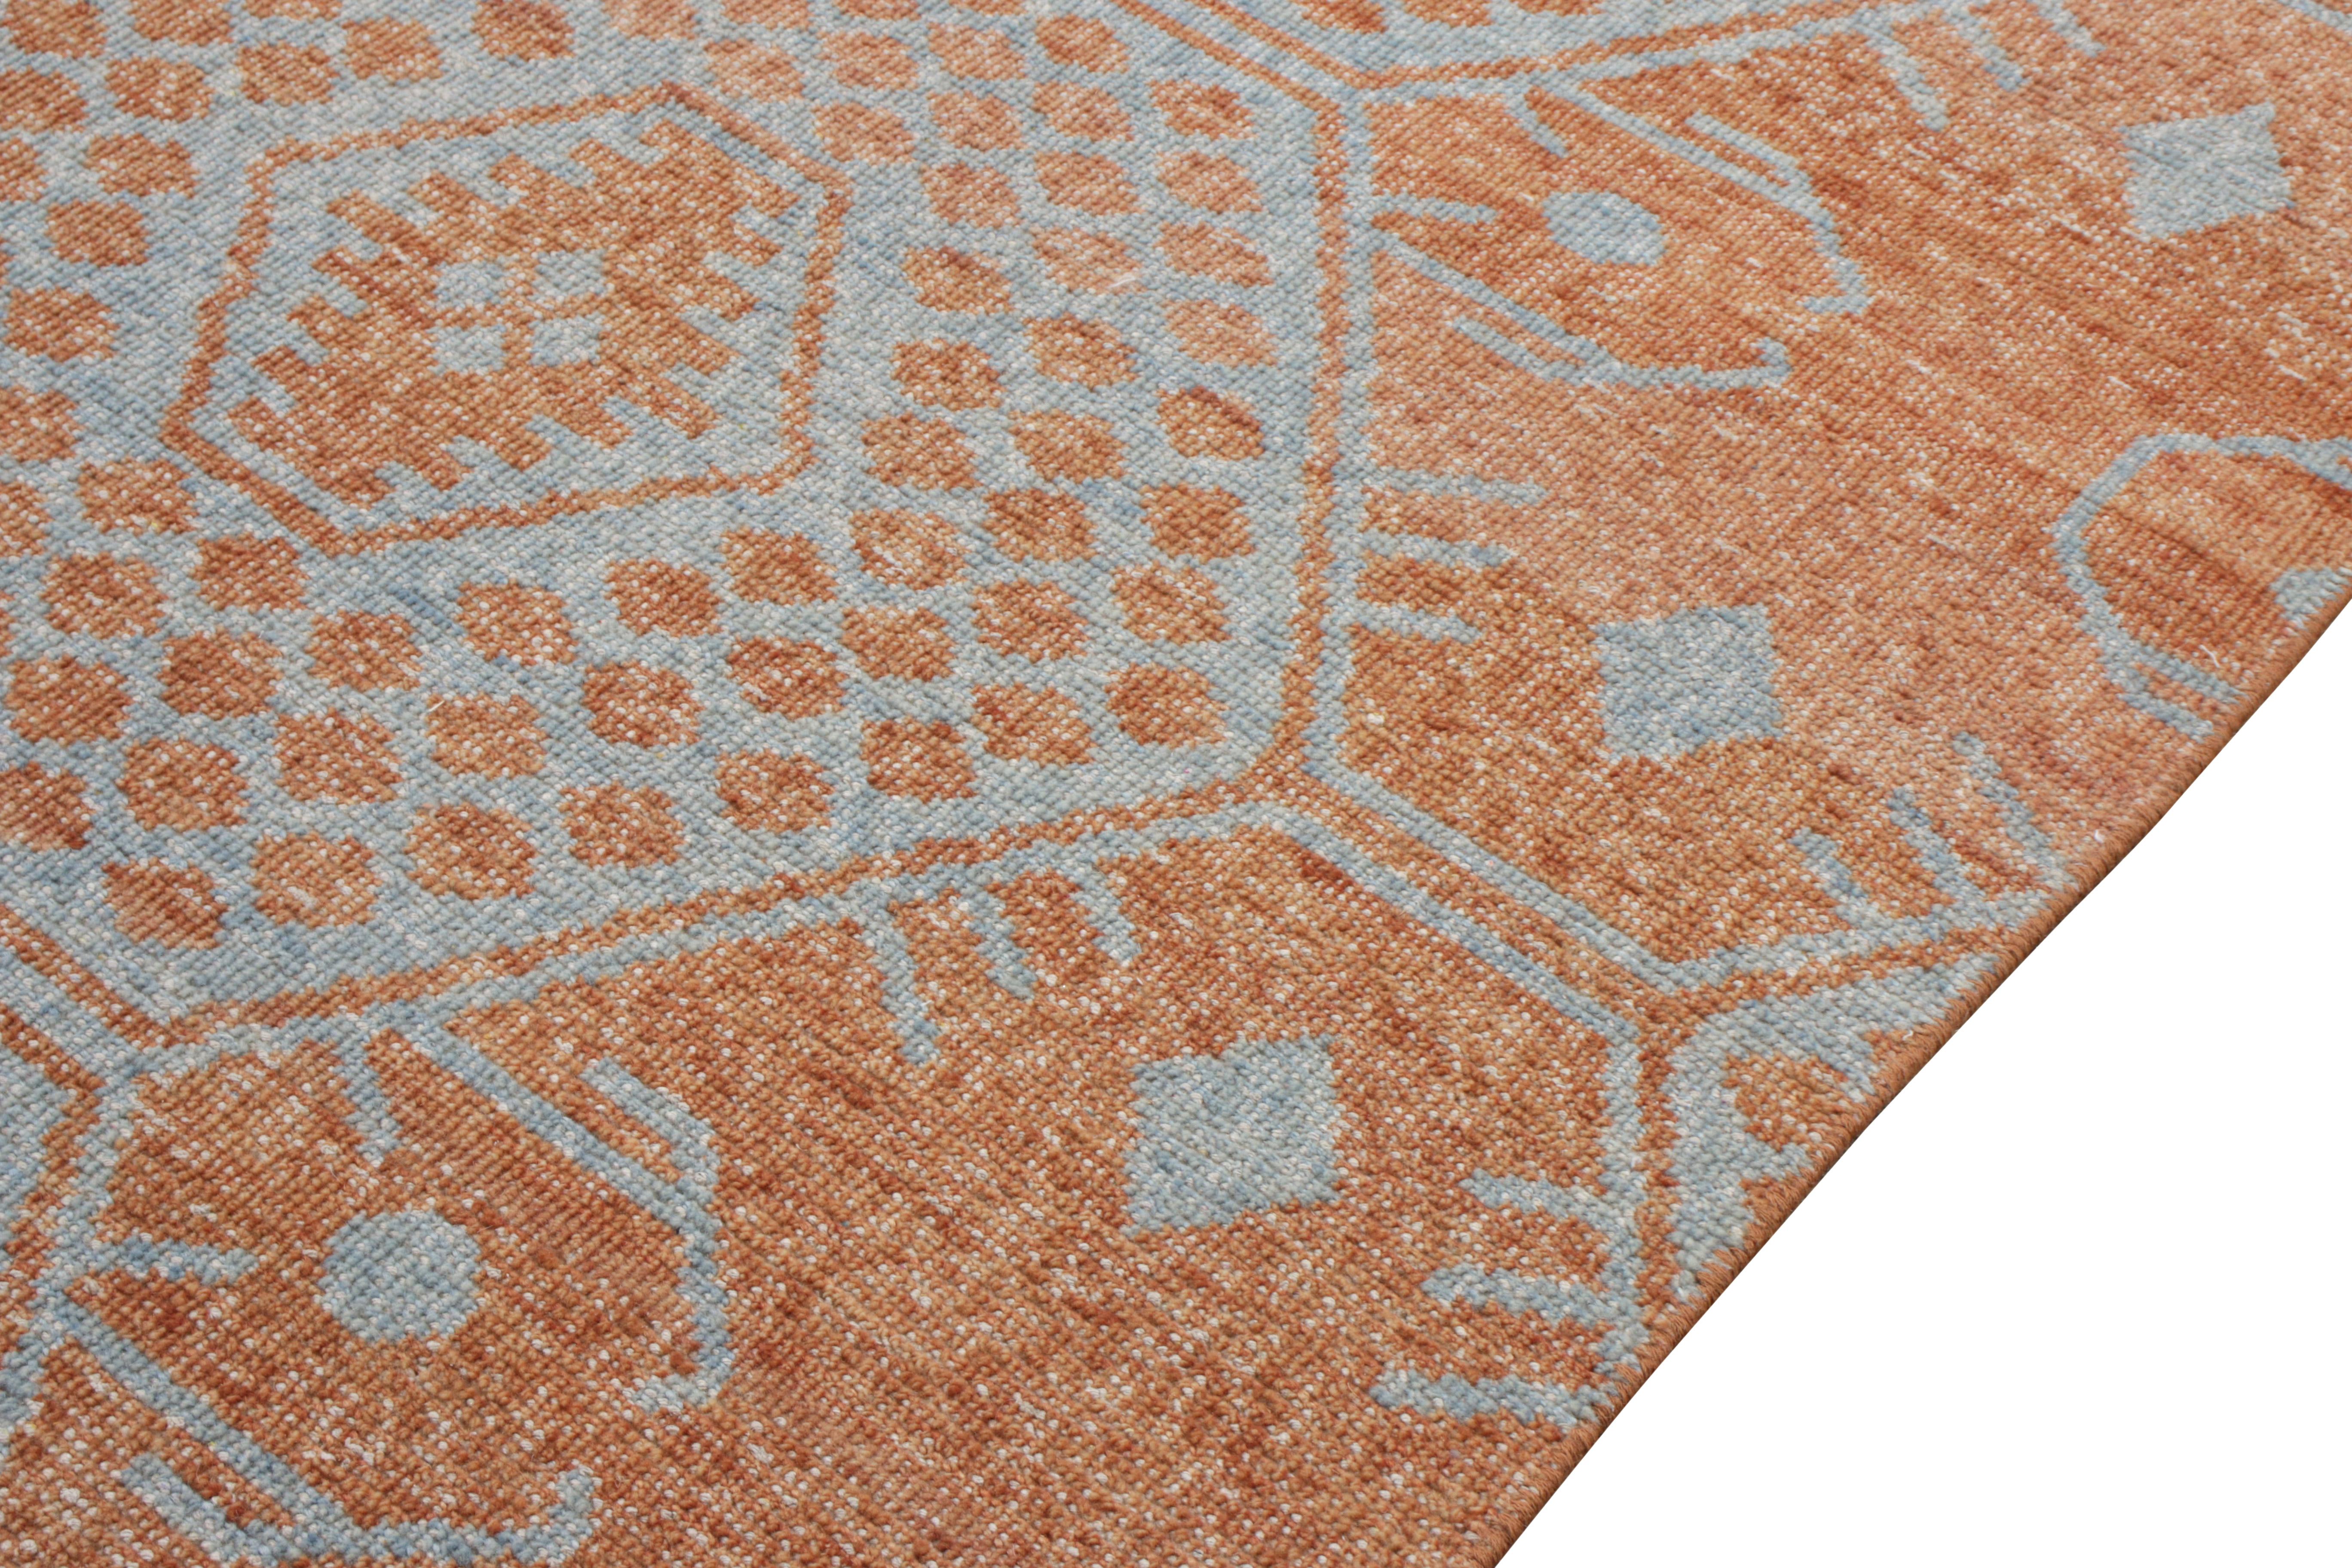 Indian Rug & Kilim’s Distressed Classic Style Rug in Orange, Blue Geometric Pattern For Sale